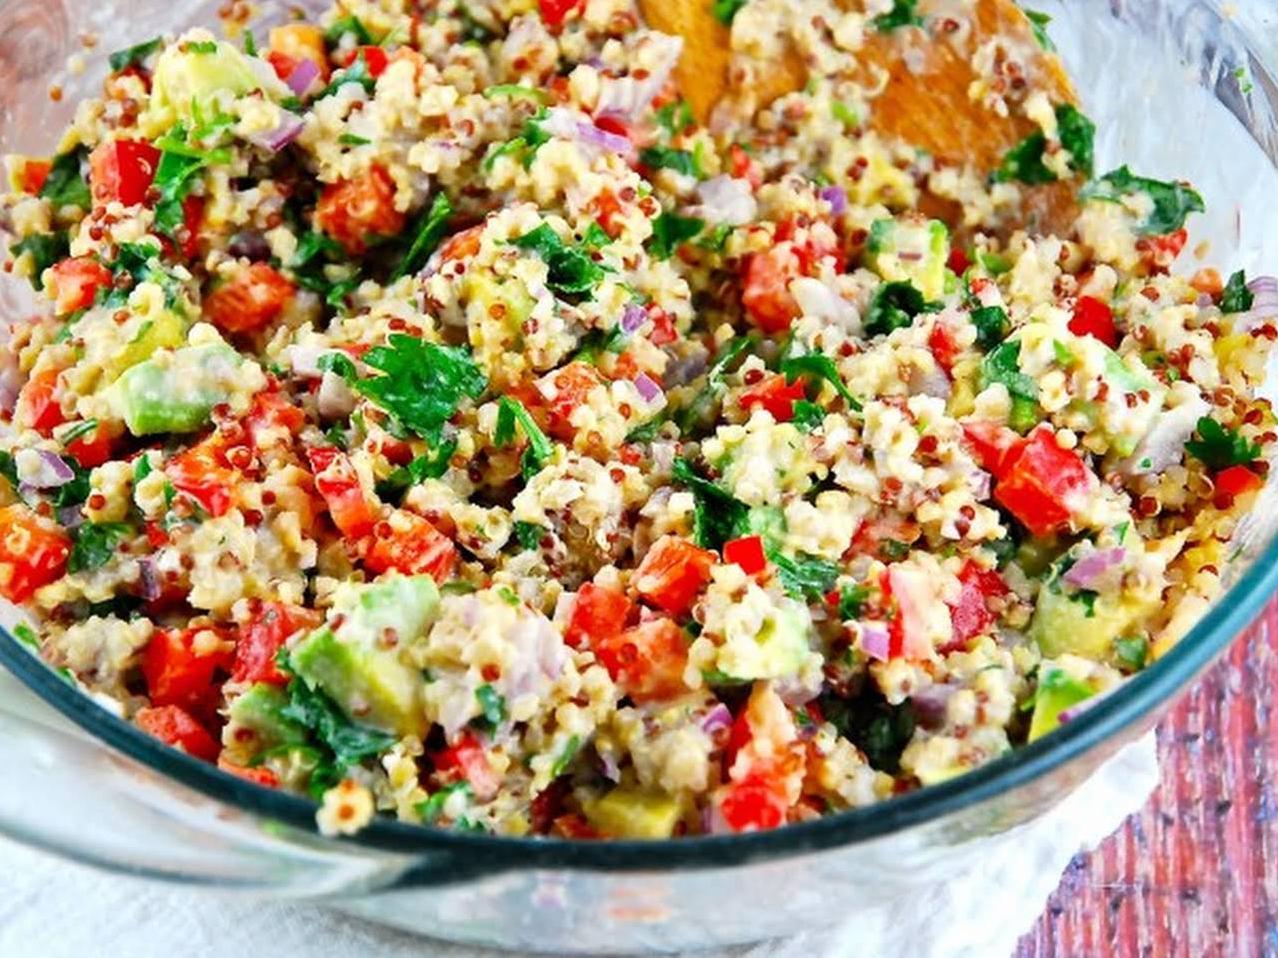  Get ready to taste the rainbow with this vibrant raw quinoa salad!